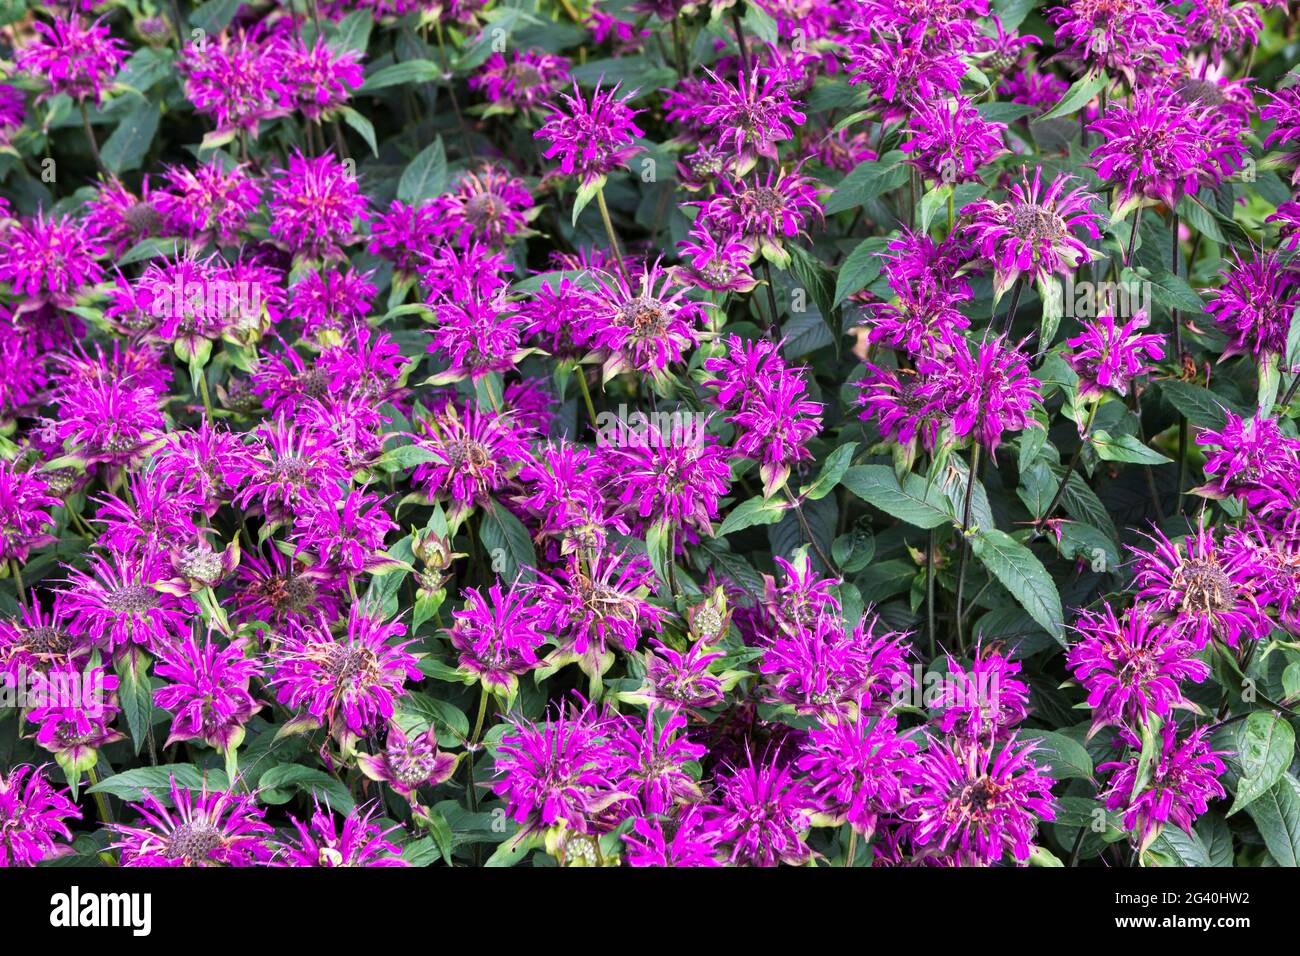 Flowers on display in Alnwick Castle gardens Stock Photo